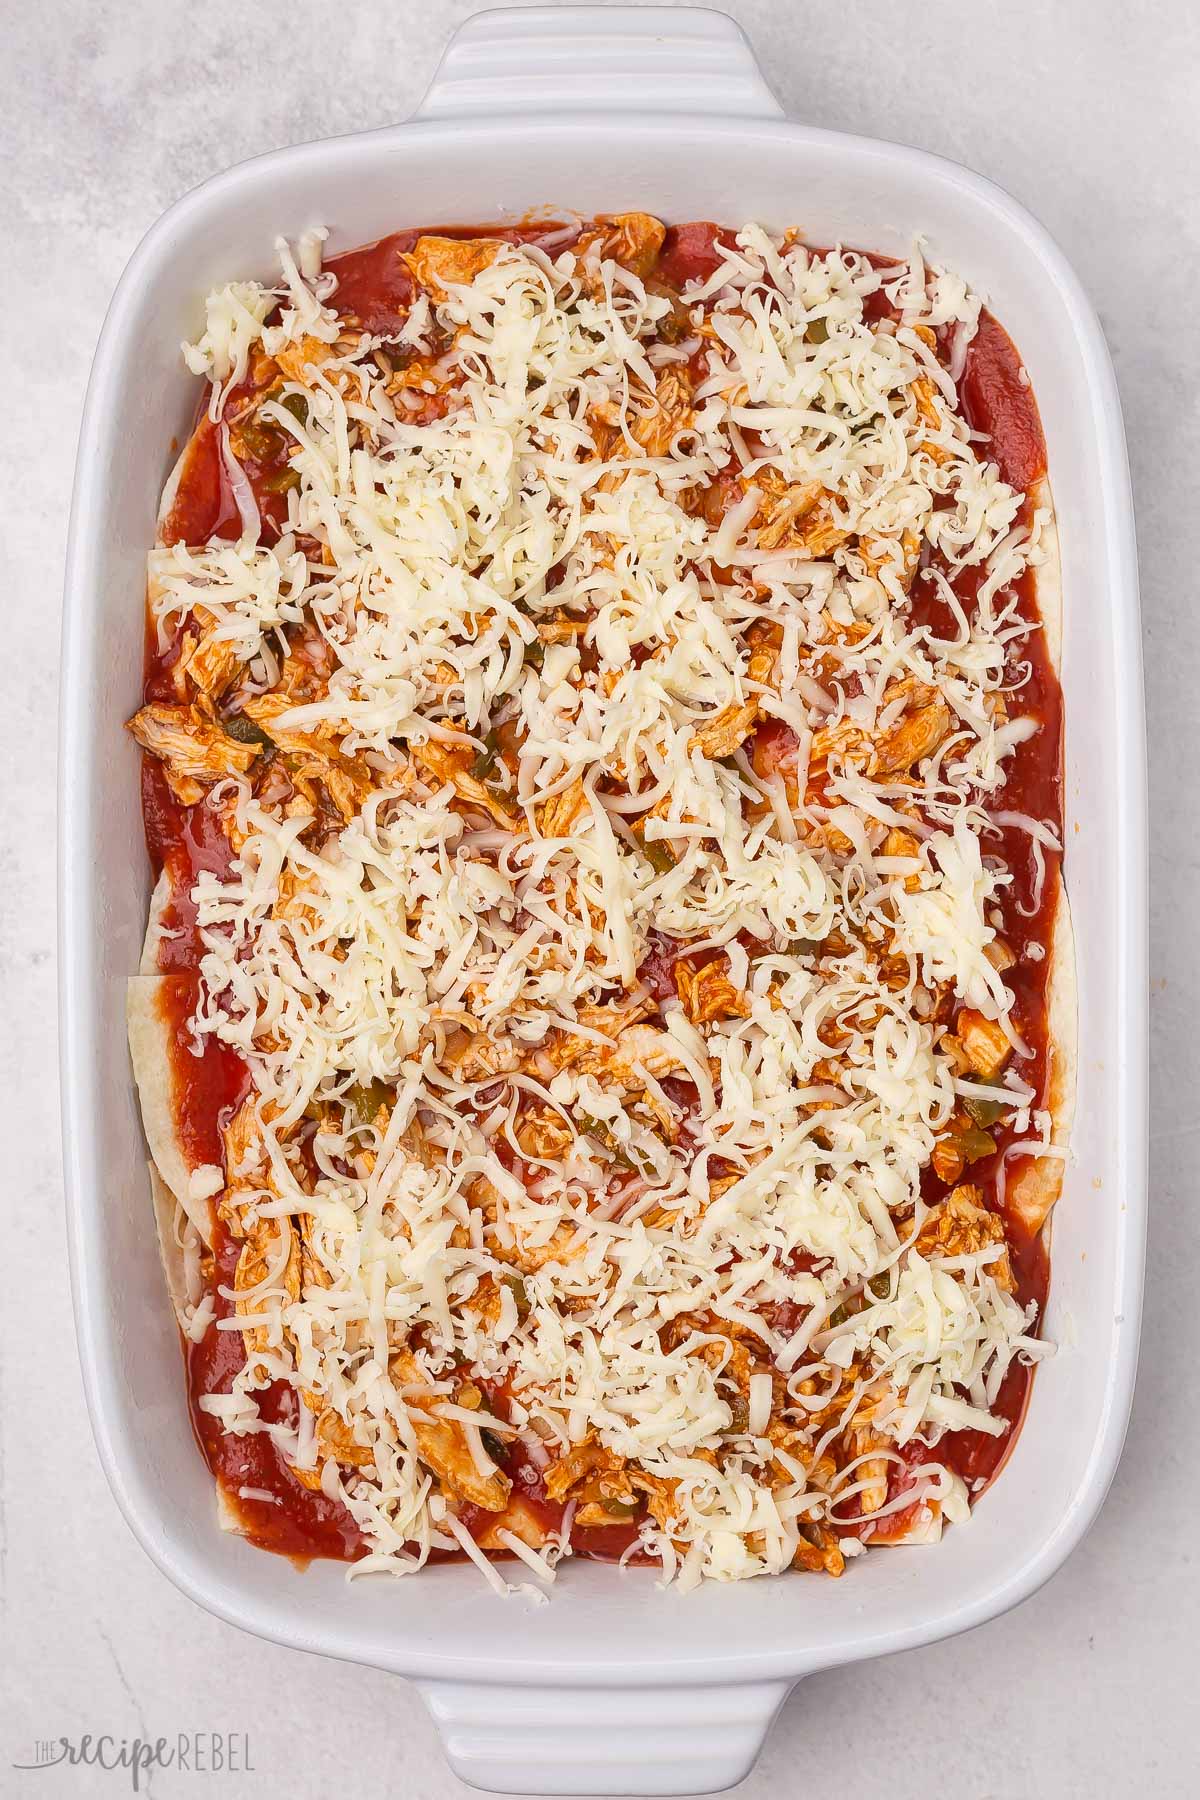 Top view of uncooked enchilada casserole with cheese on top.